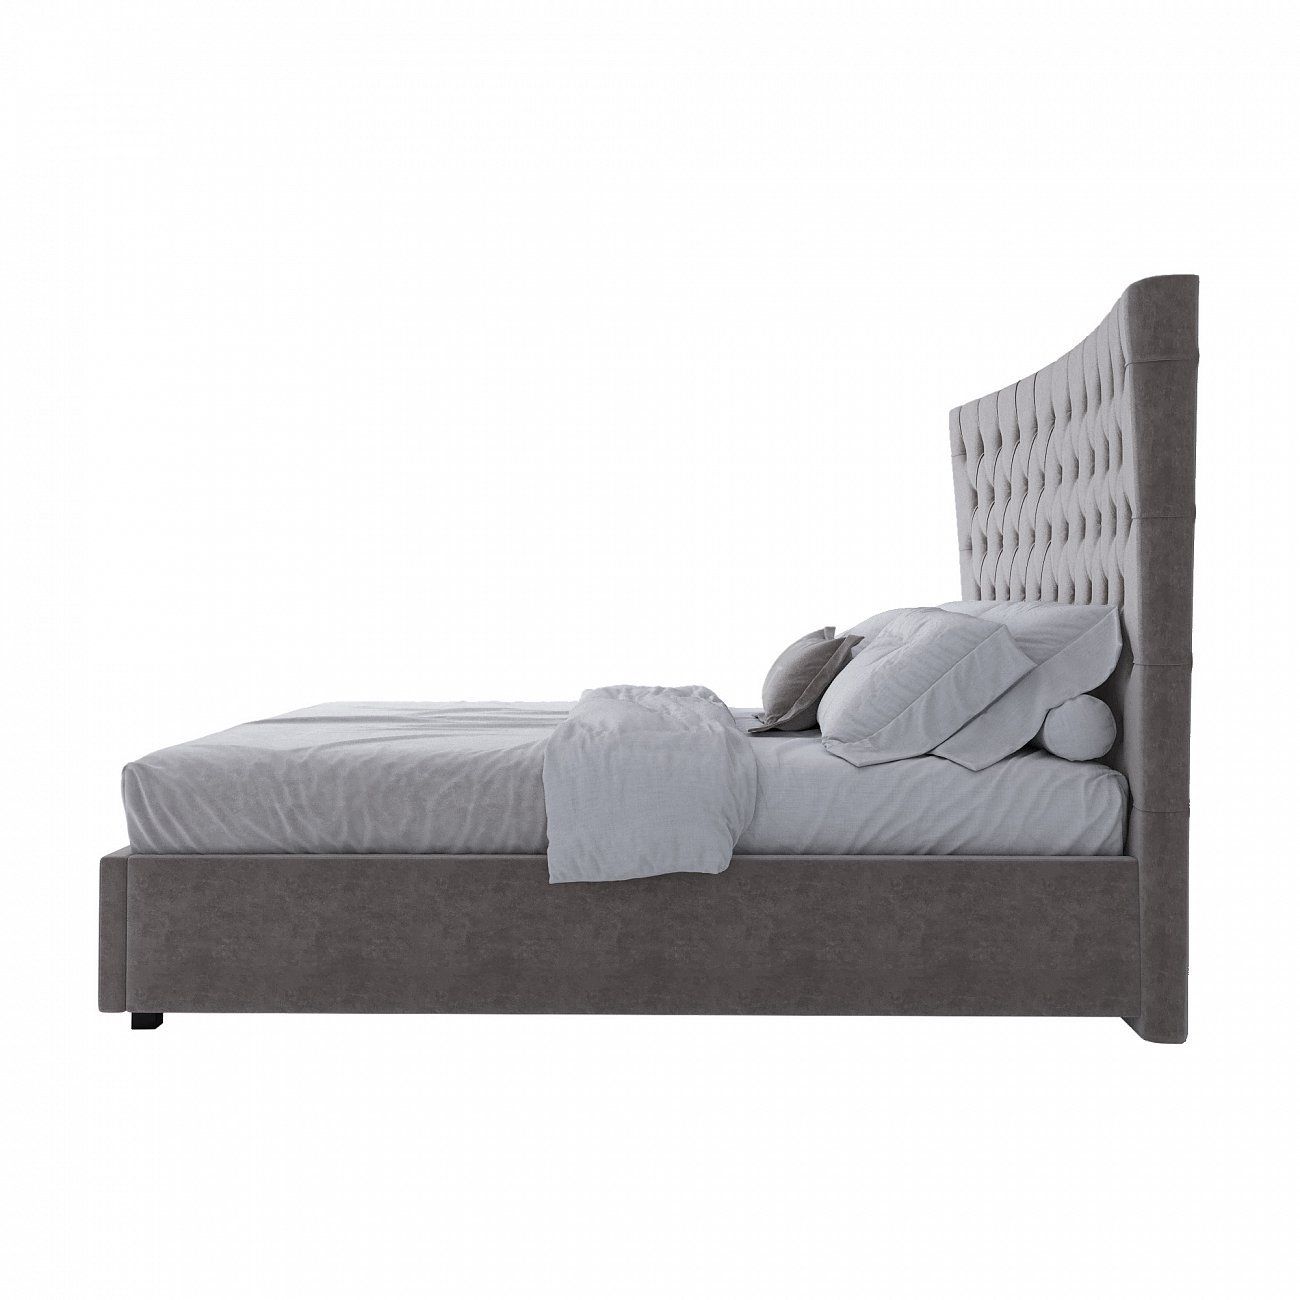 Double bed with upholstered headboard 160x200 cm brown-gray QuickSand